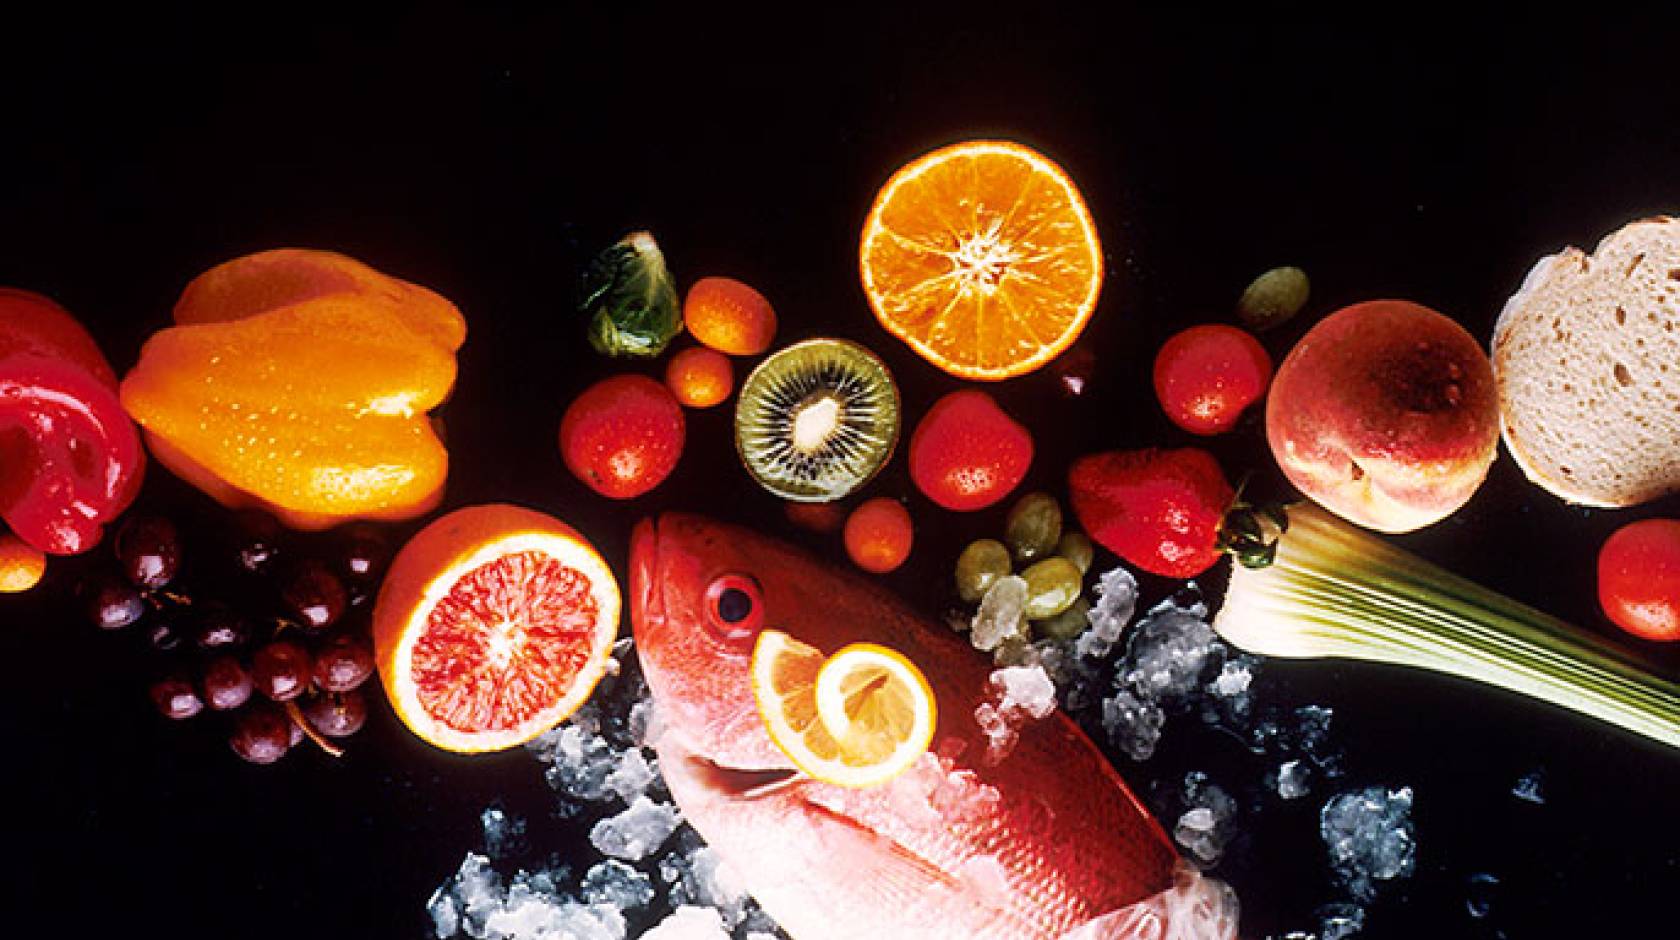 Some healthy foods, including fruit, vegetables, fish and bread.